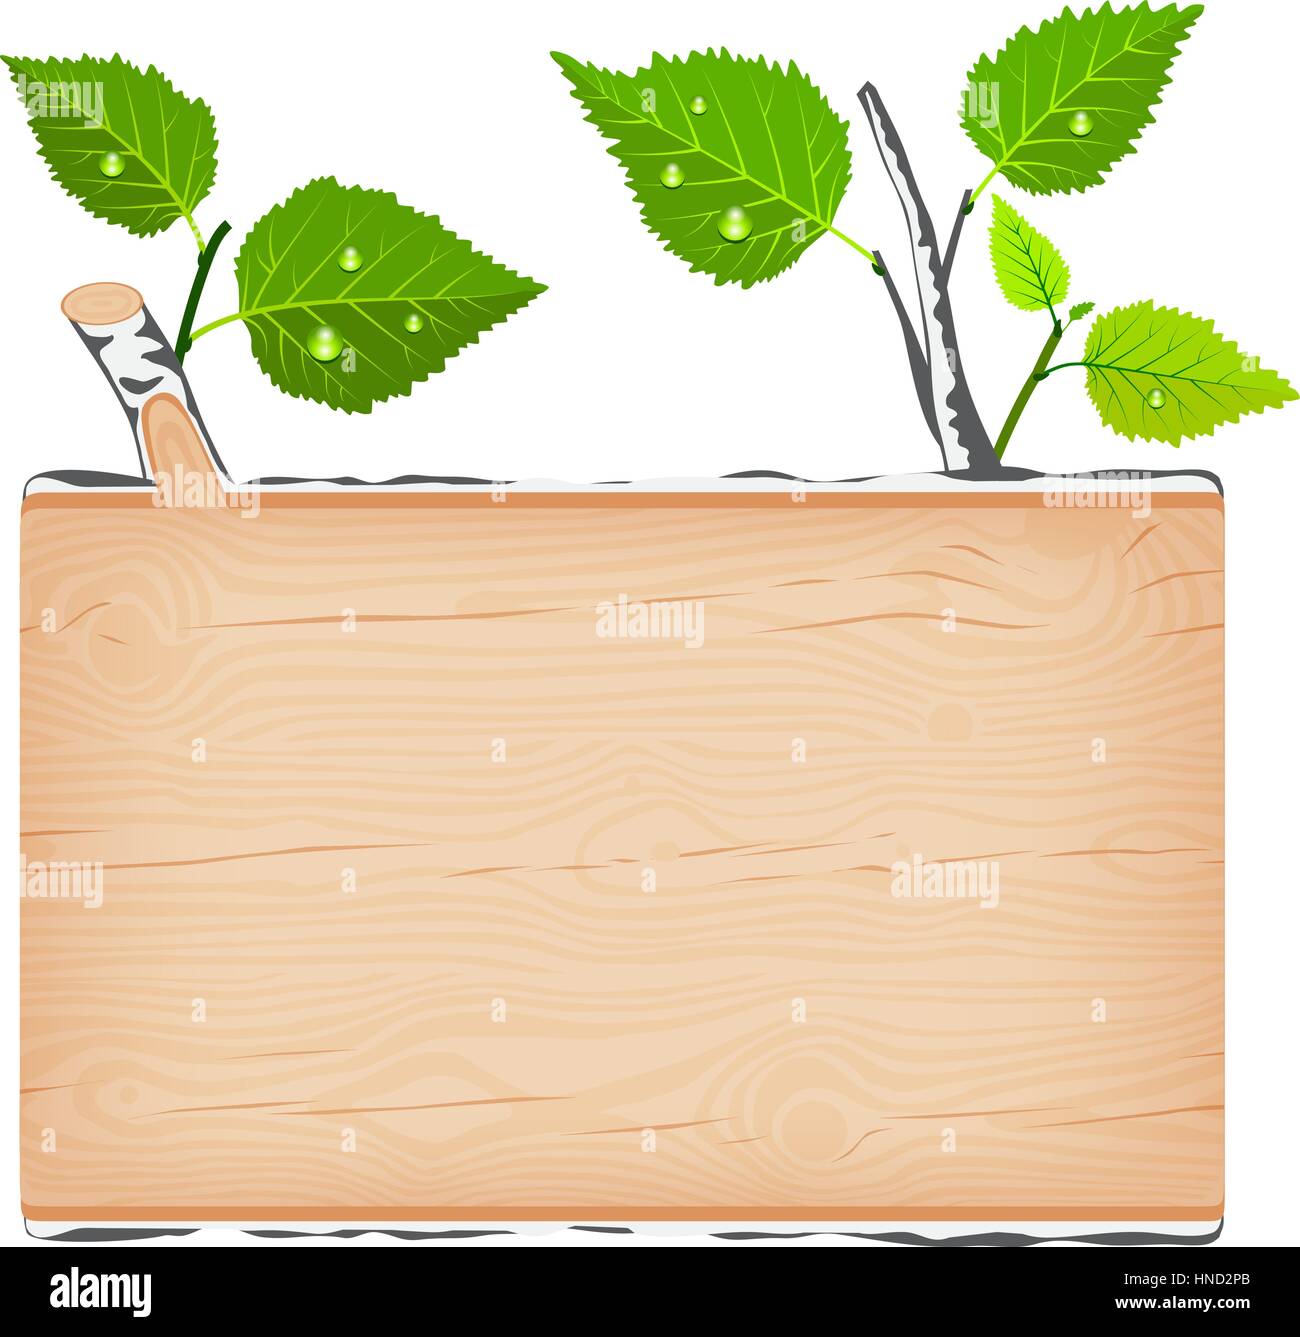 Birch wooden rectangular signboard with green leaves and water drops vector illustration Stock Vector